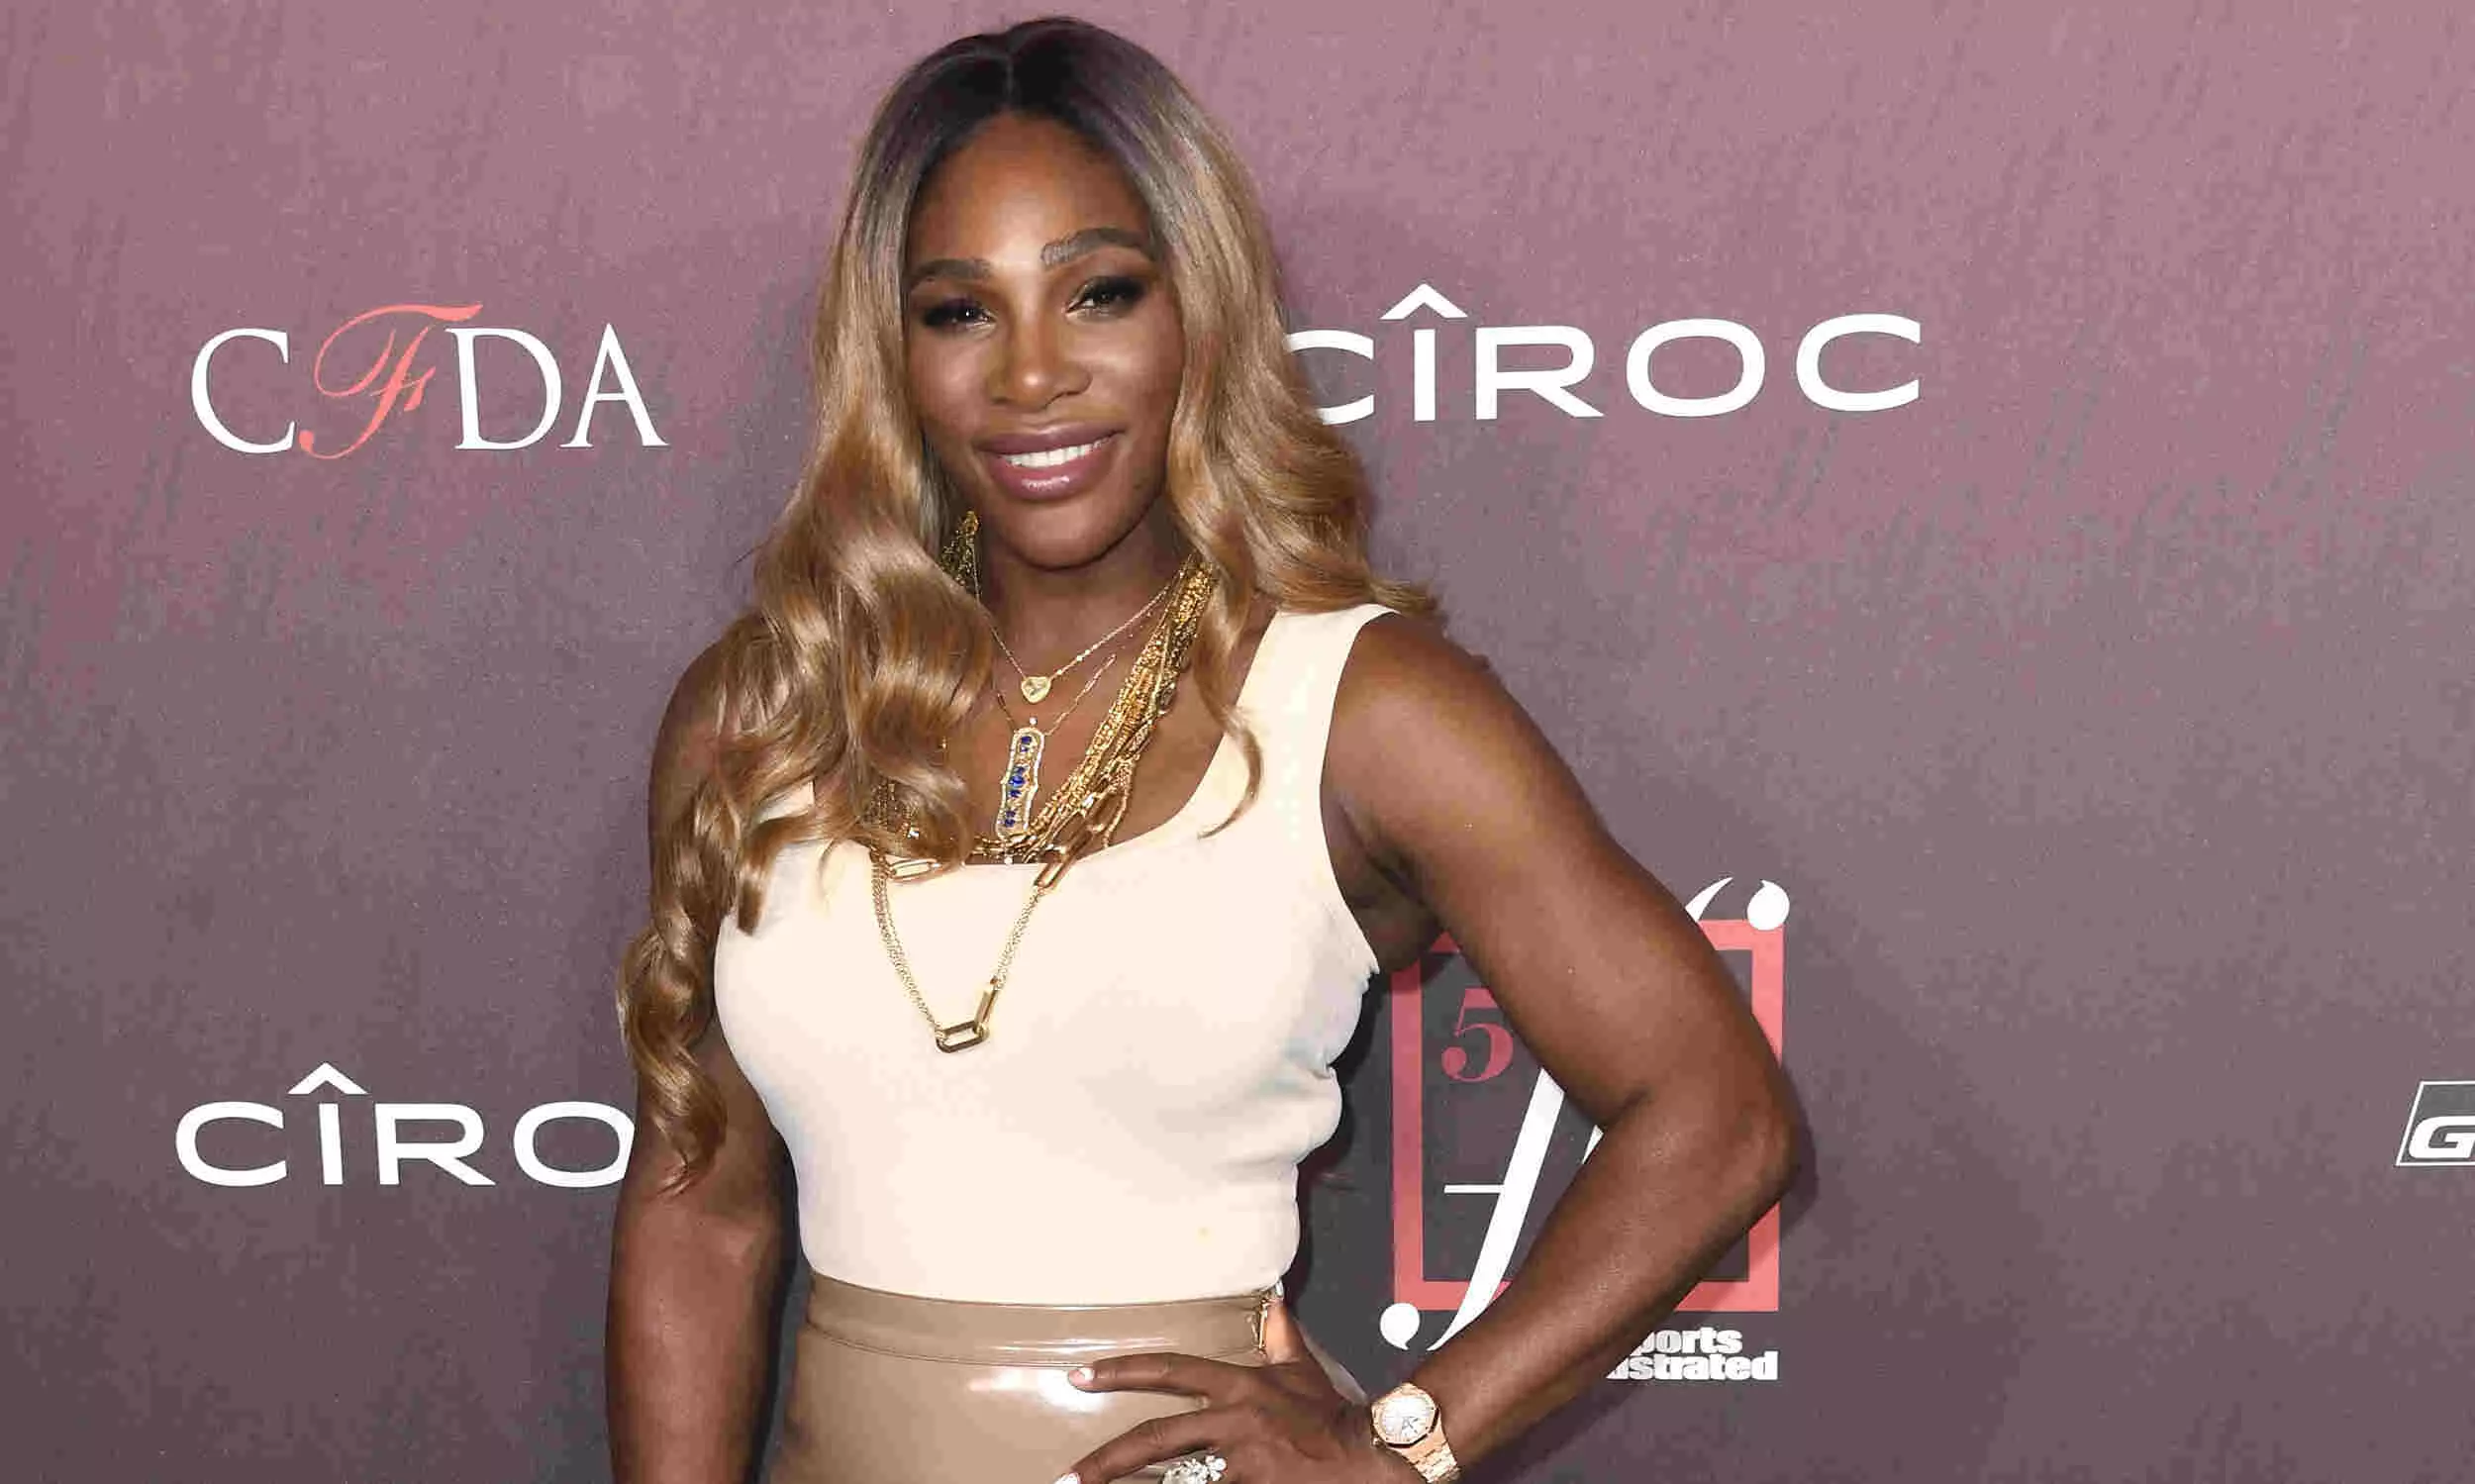 Serena faces old foe at U.S. Open: Her inner critic